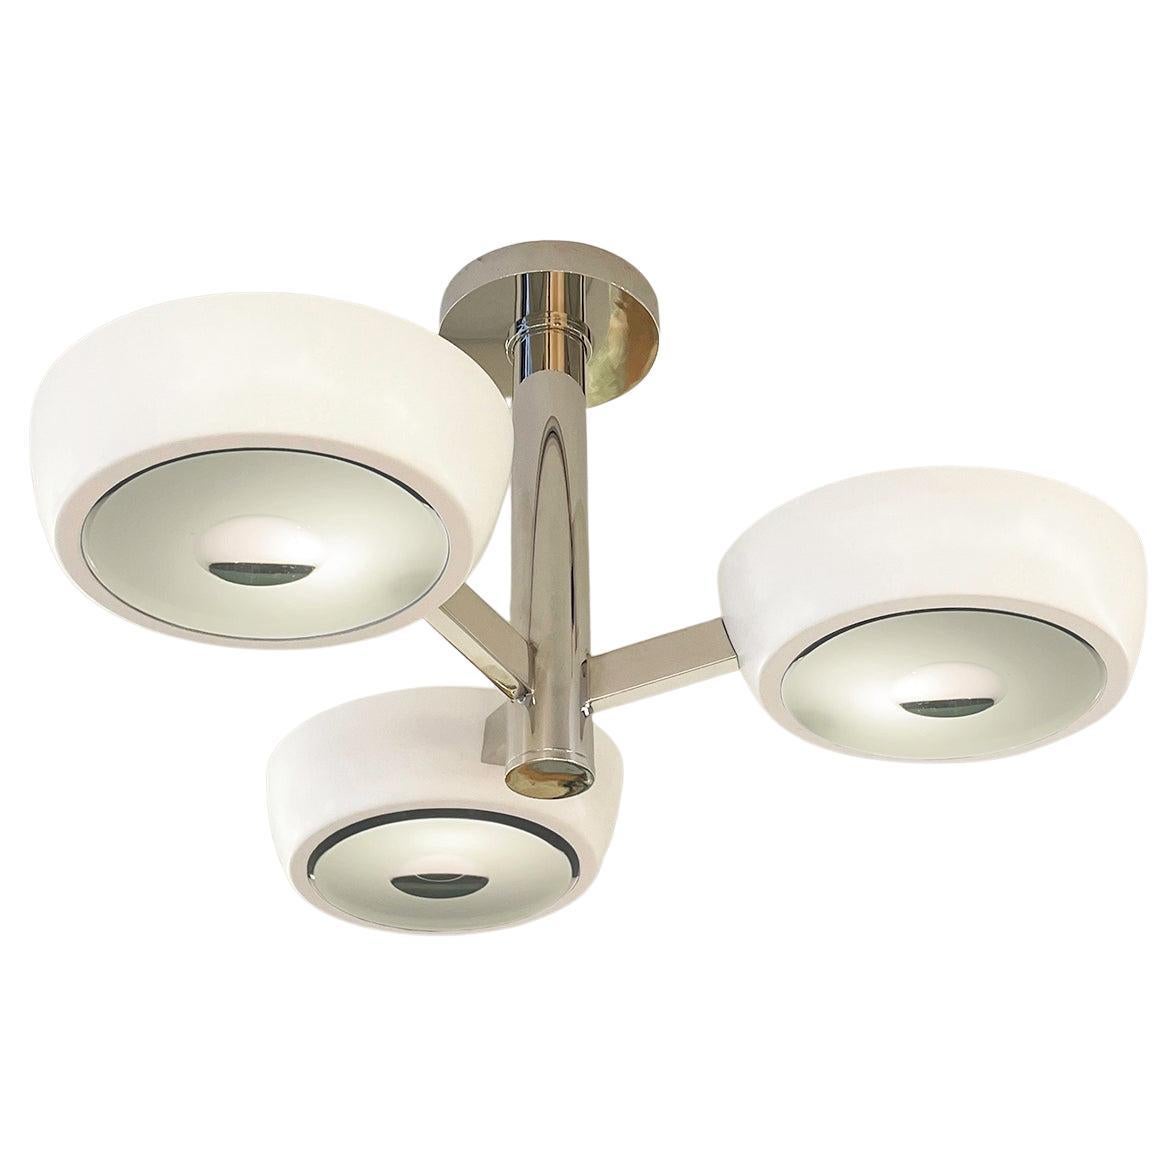 Rose Piccolo Ceiling Light by Gaspare Asaro- Green Glass and Polished Nickel